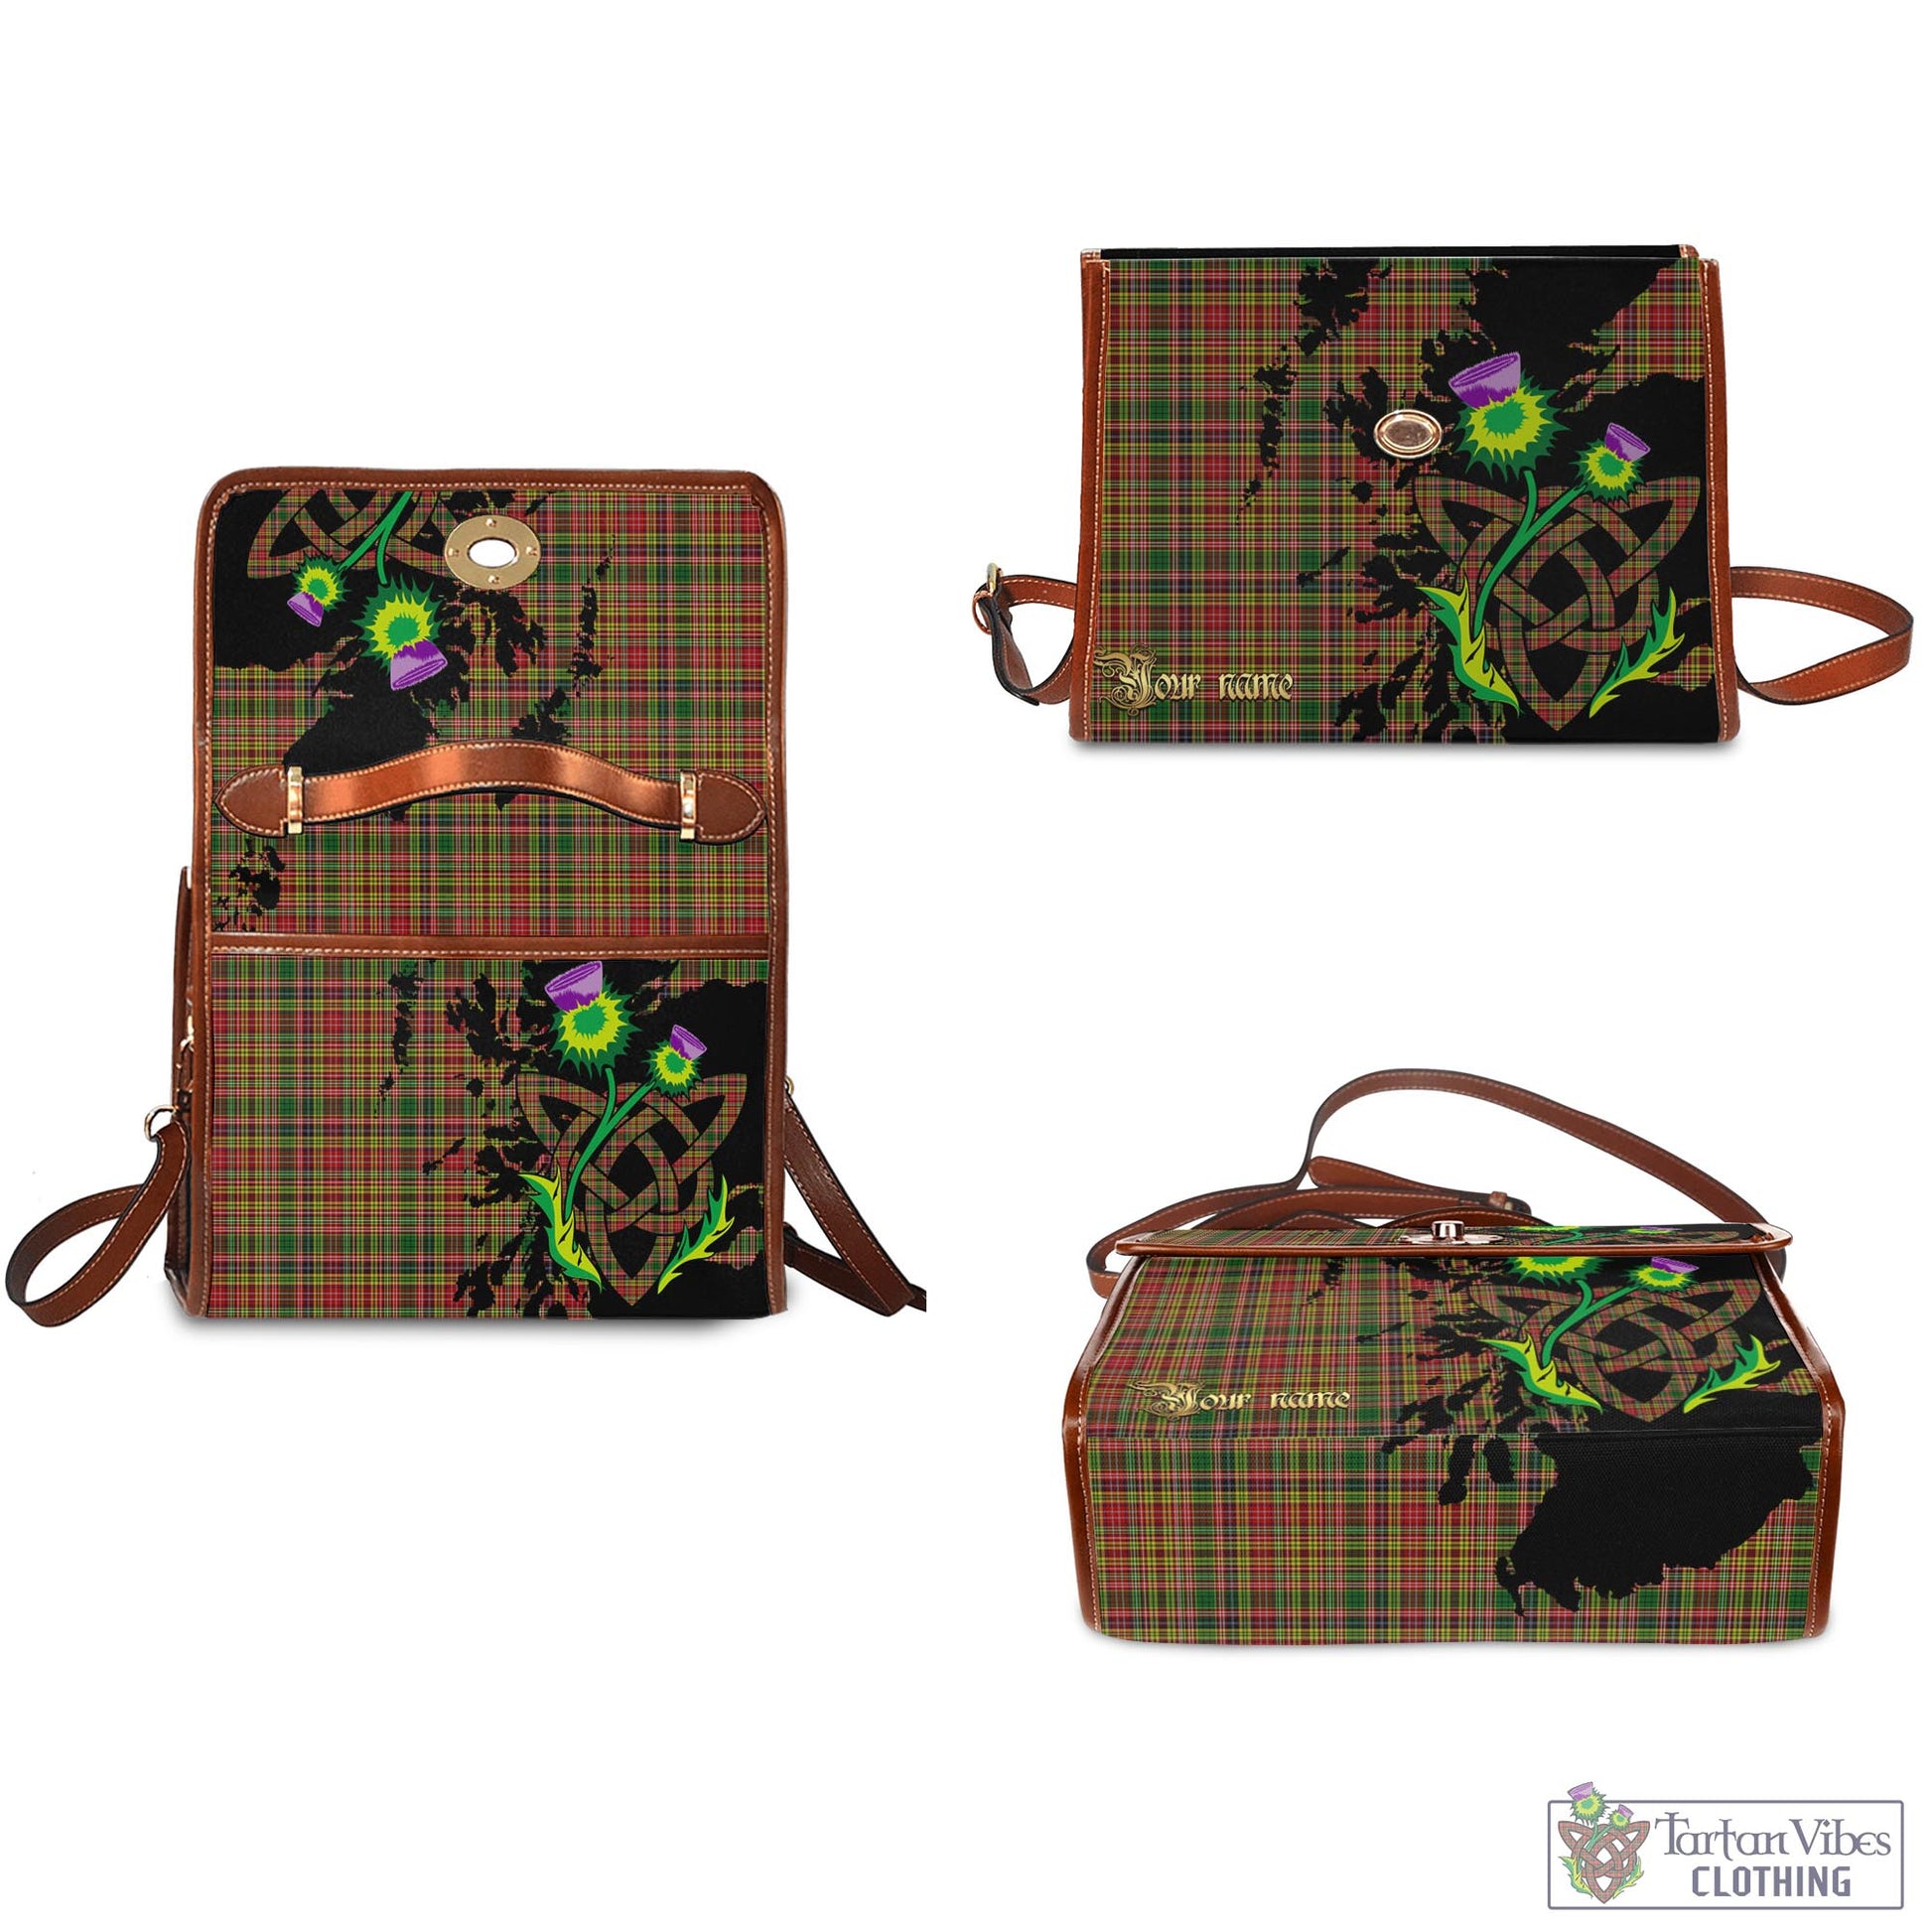 Tartan Vibes Clothing Drummond of Strathallan Tartan Waterproof Canvas Bag with Scotland Map and Thistle Celtic Accents